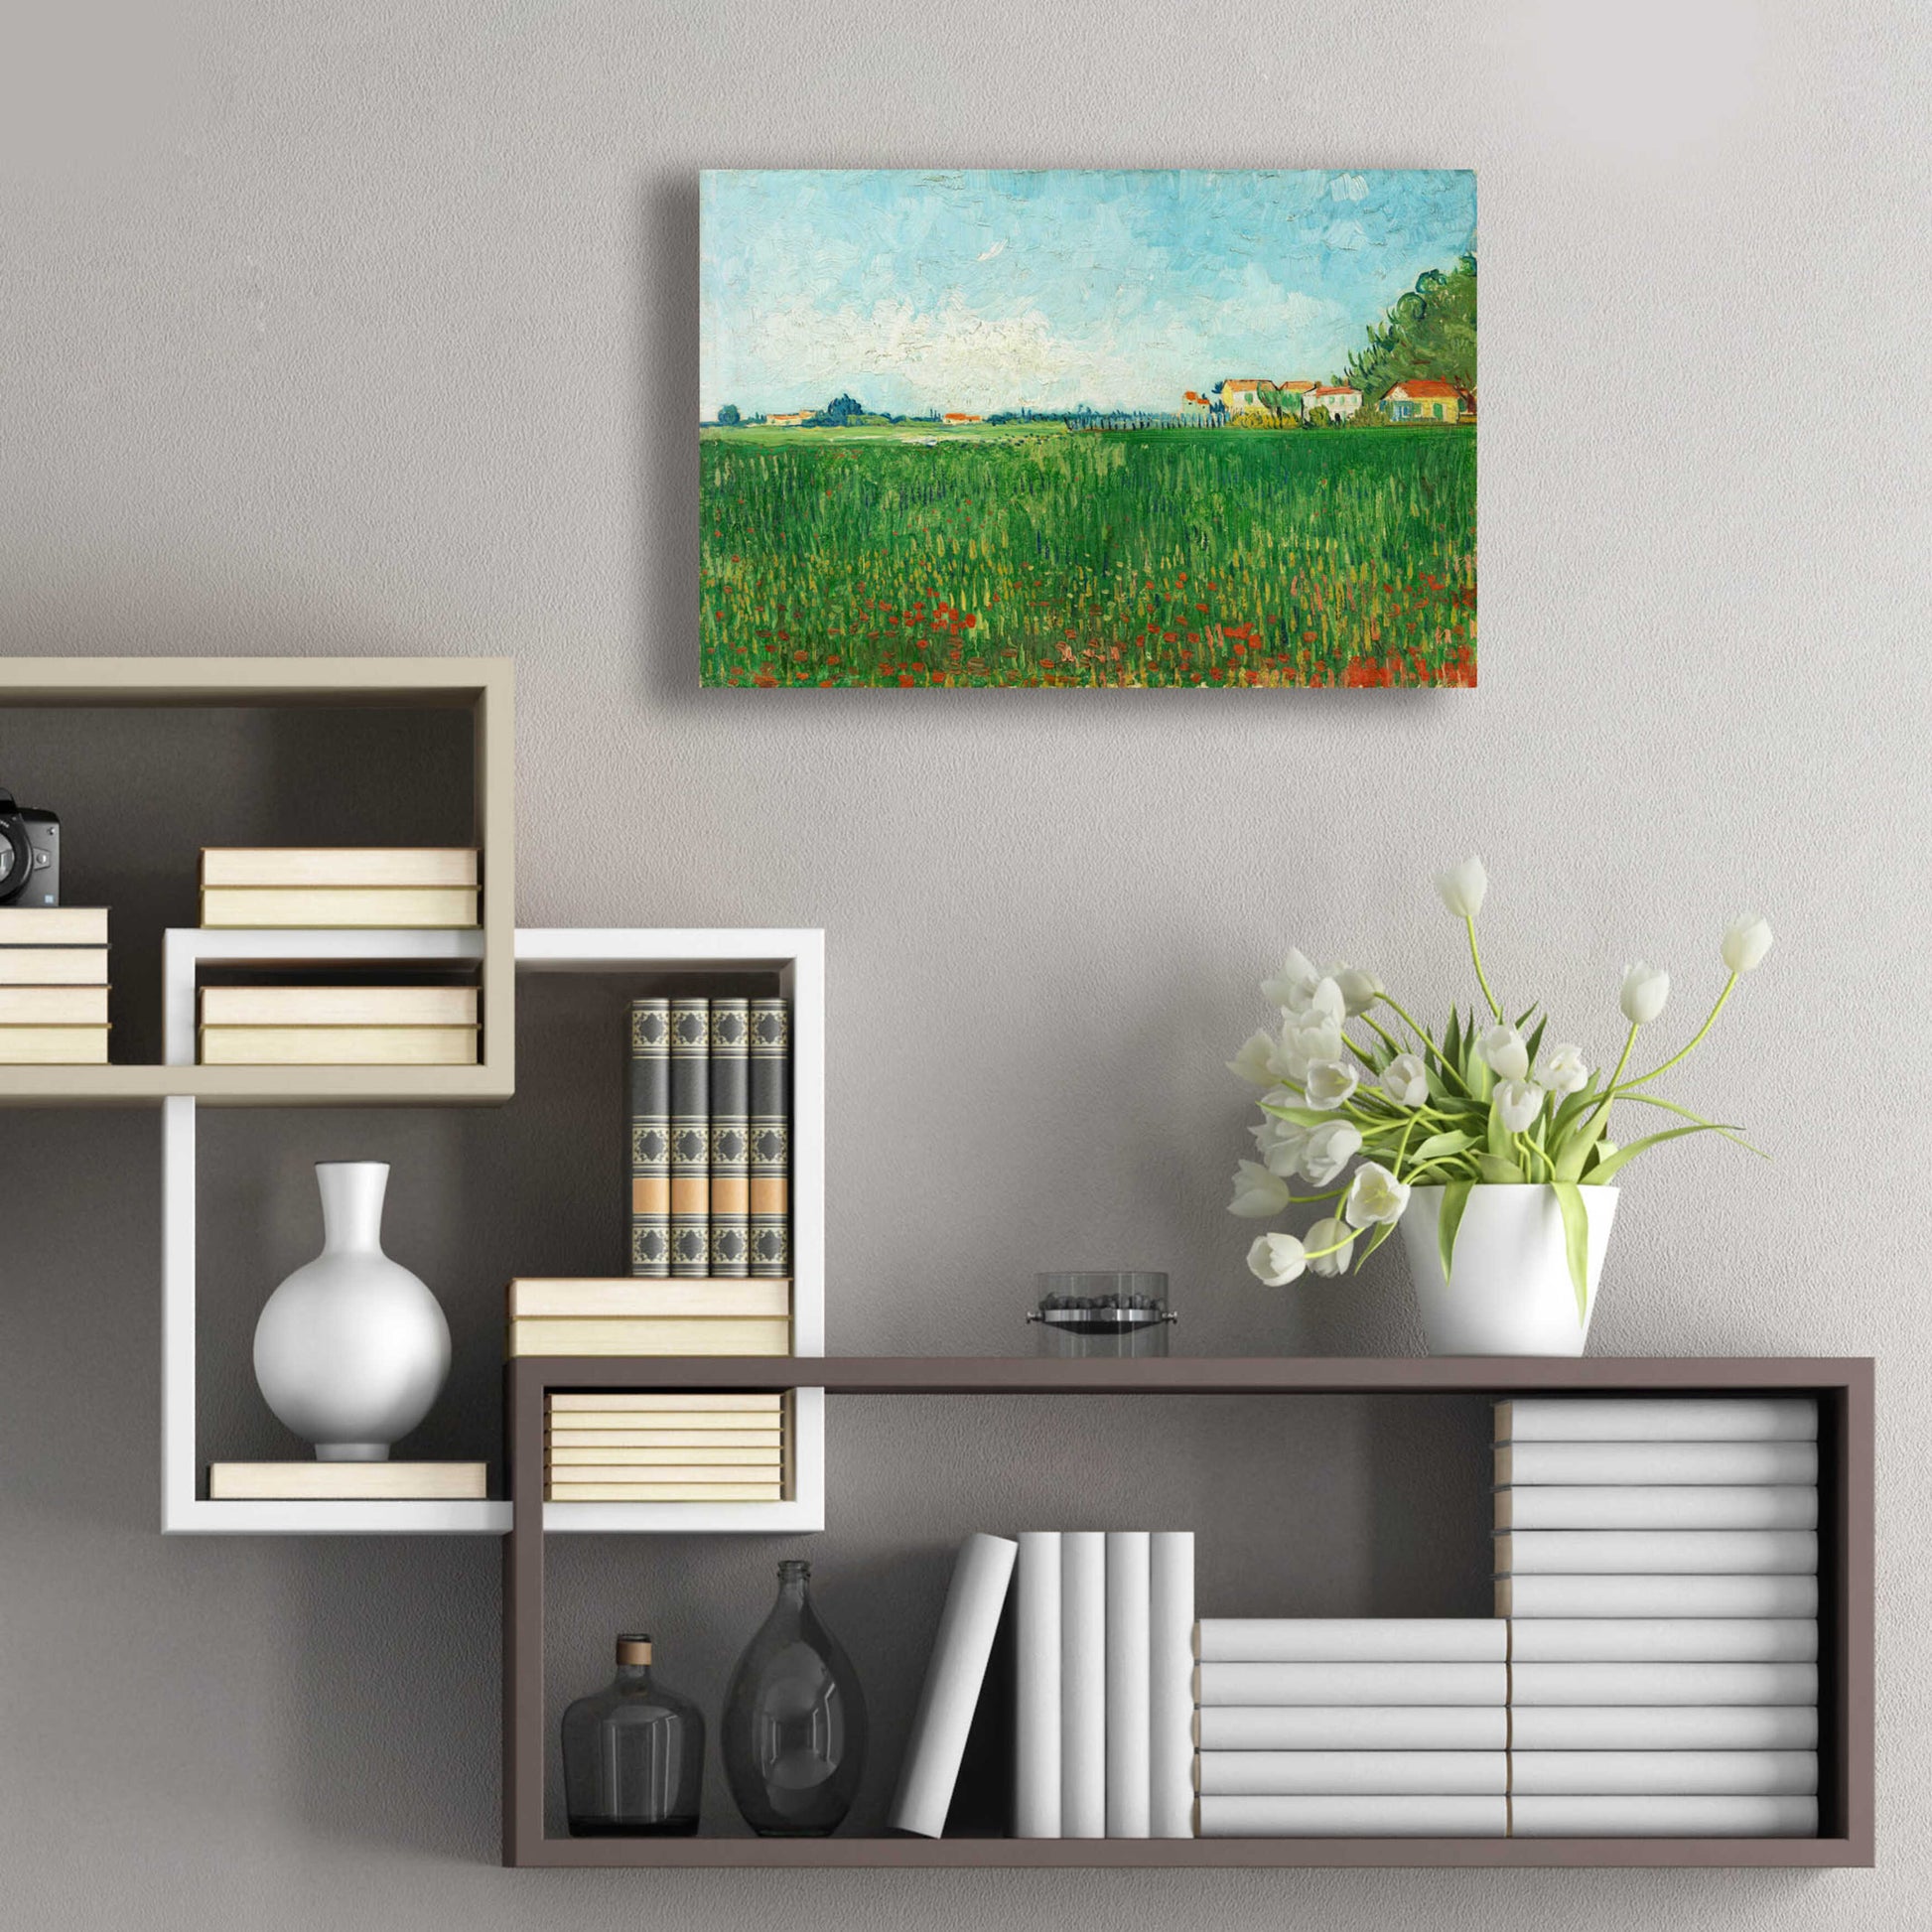 Epic Art 'Field With Poppies' by Vincent Van Gogh, Acrylic Glass Wall Art,24x16